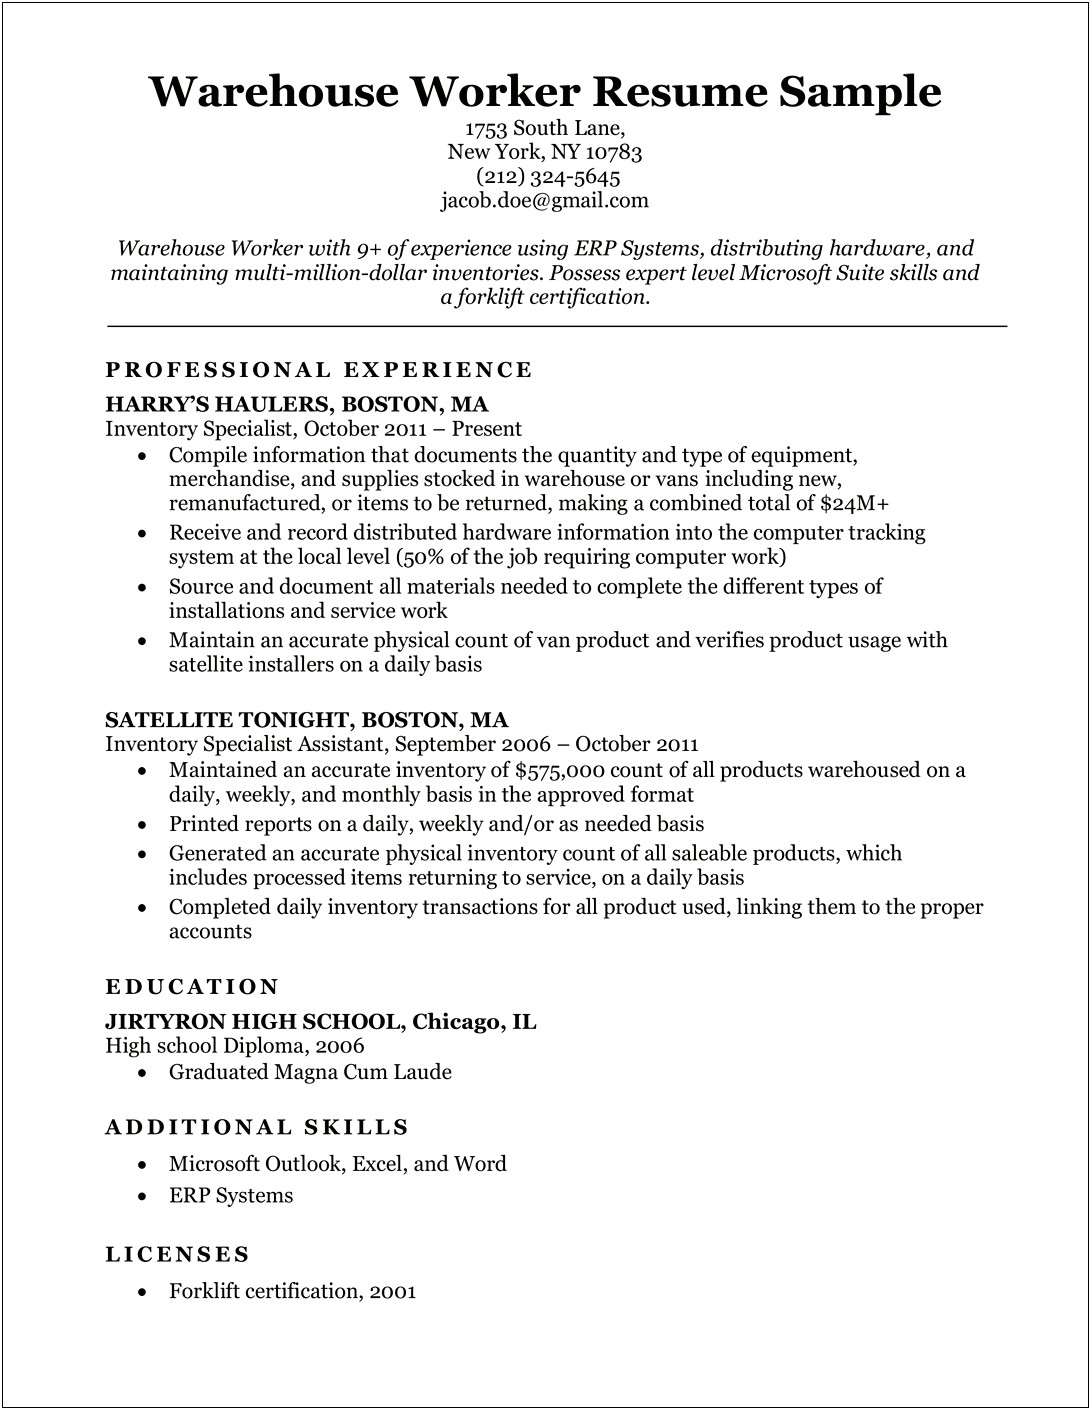 Free Resume Template For Warehouse Worker